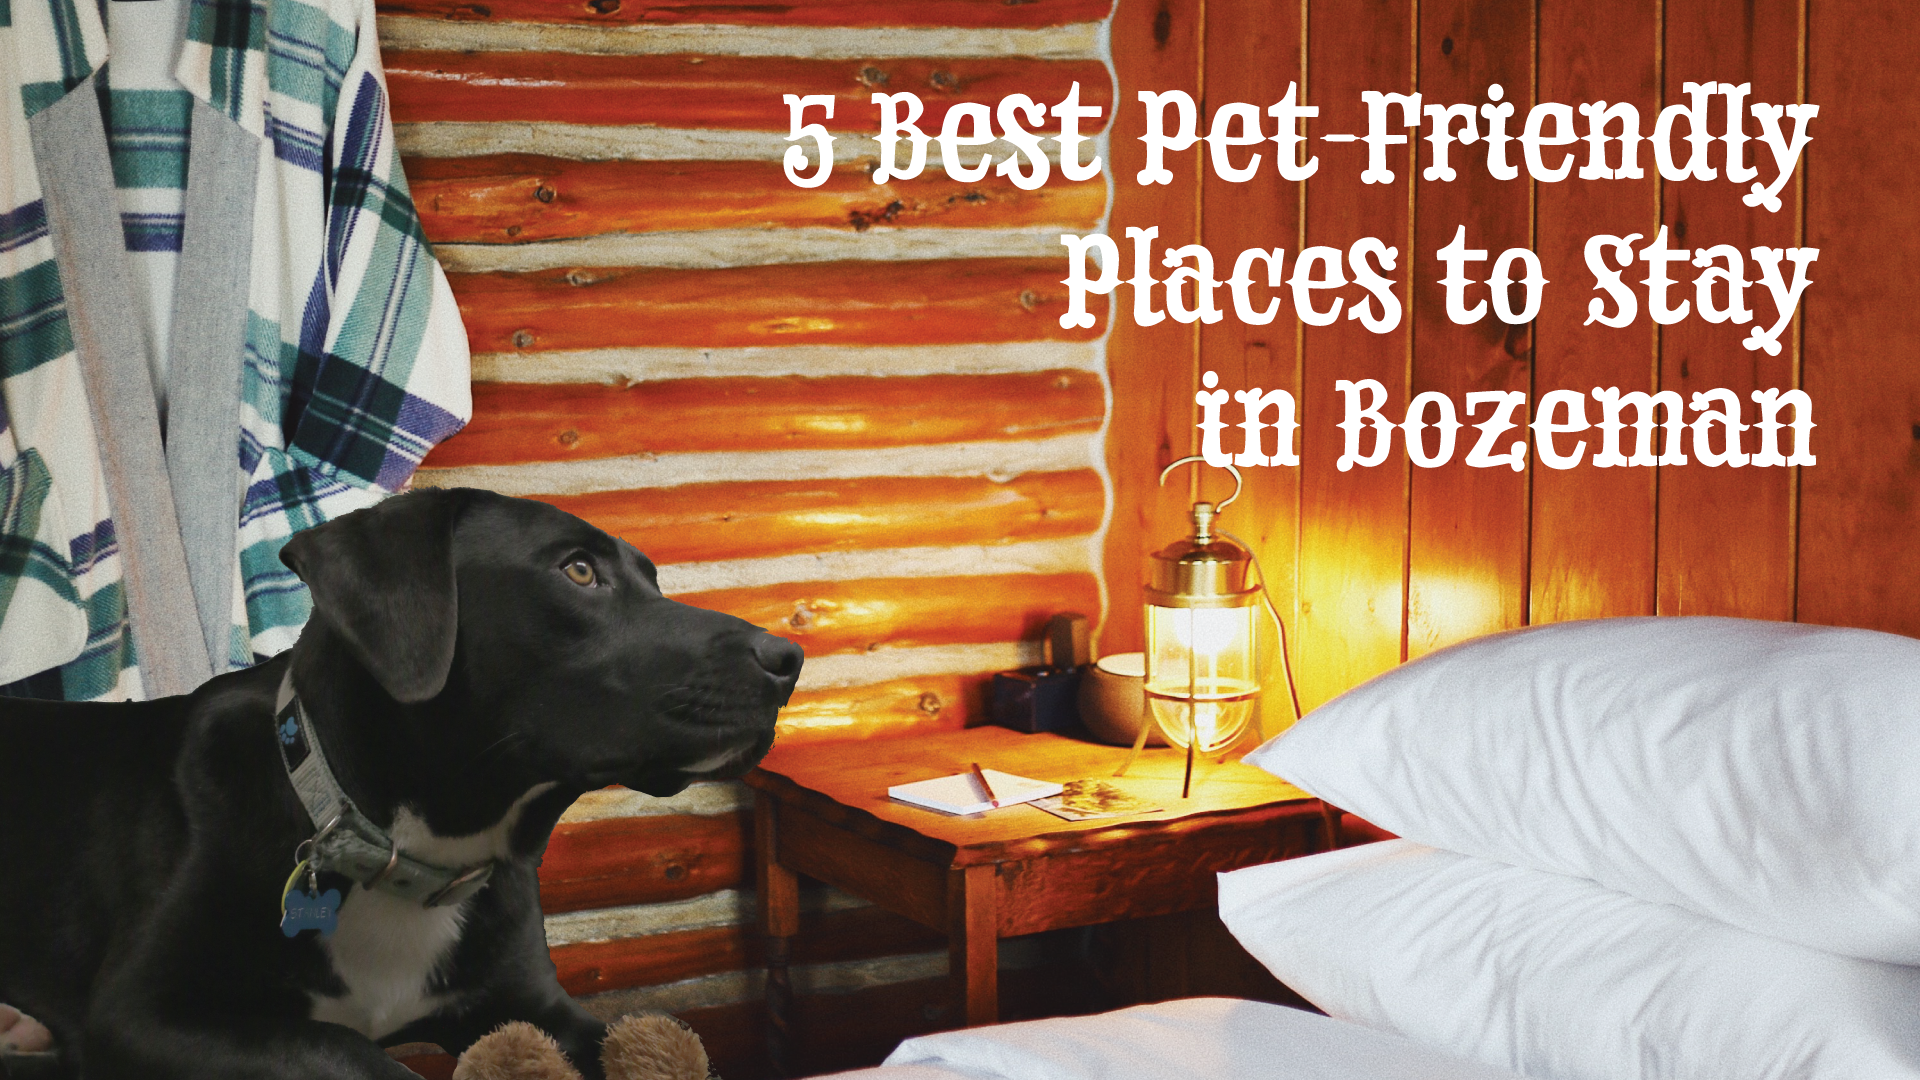 Pet-Friendly Places to Stay in Bozeman